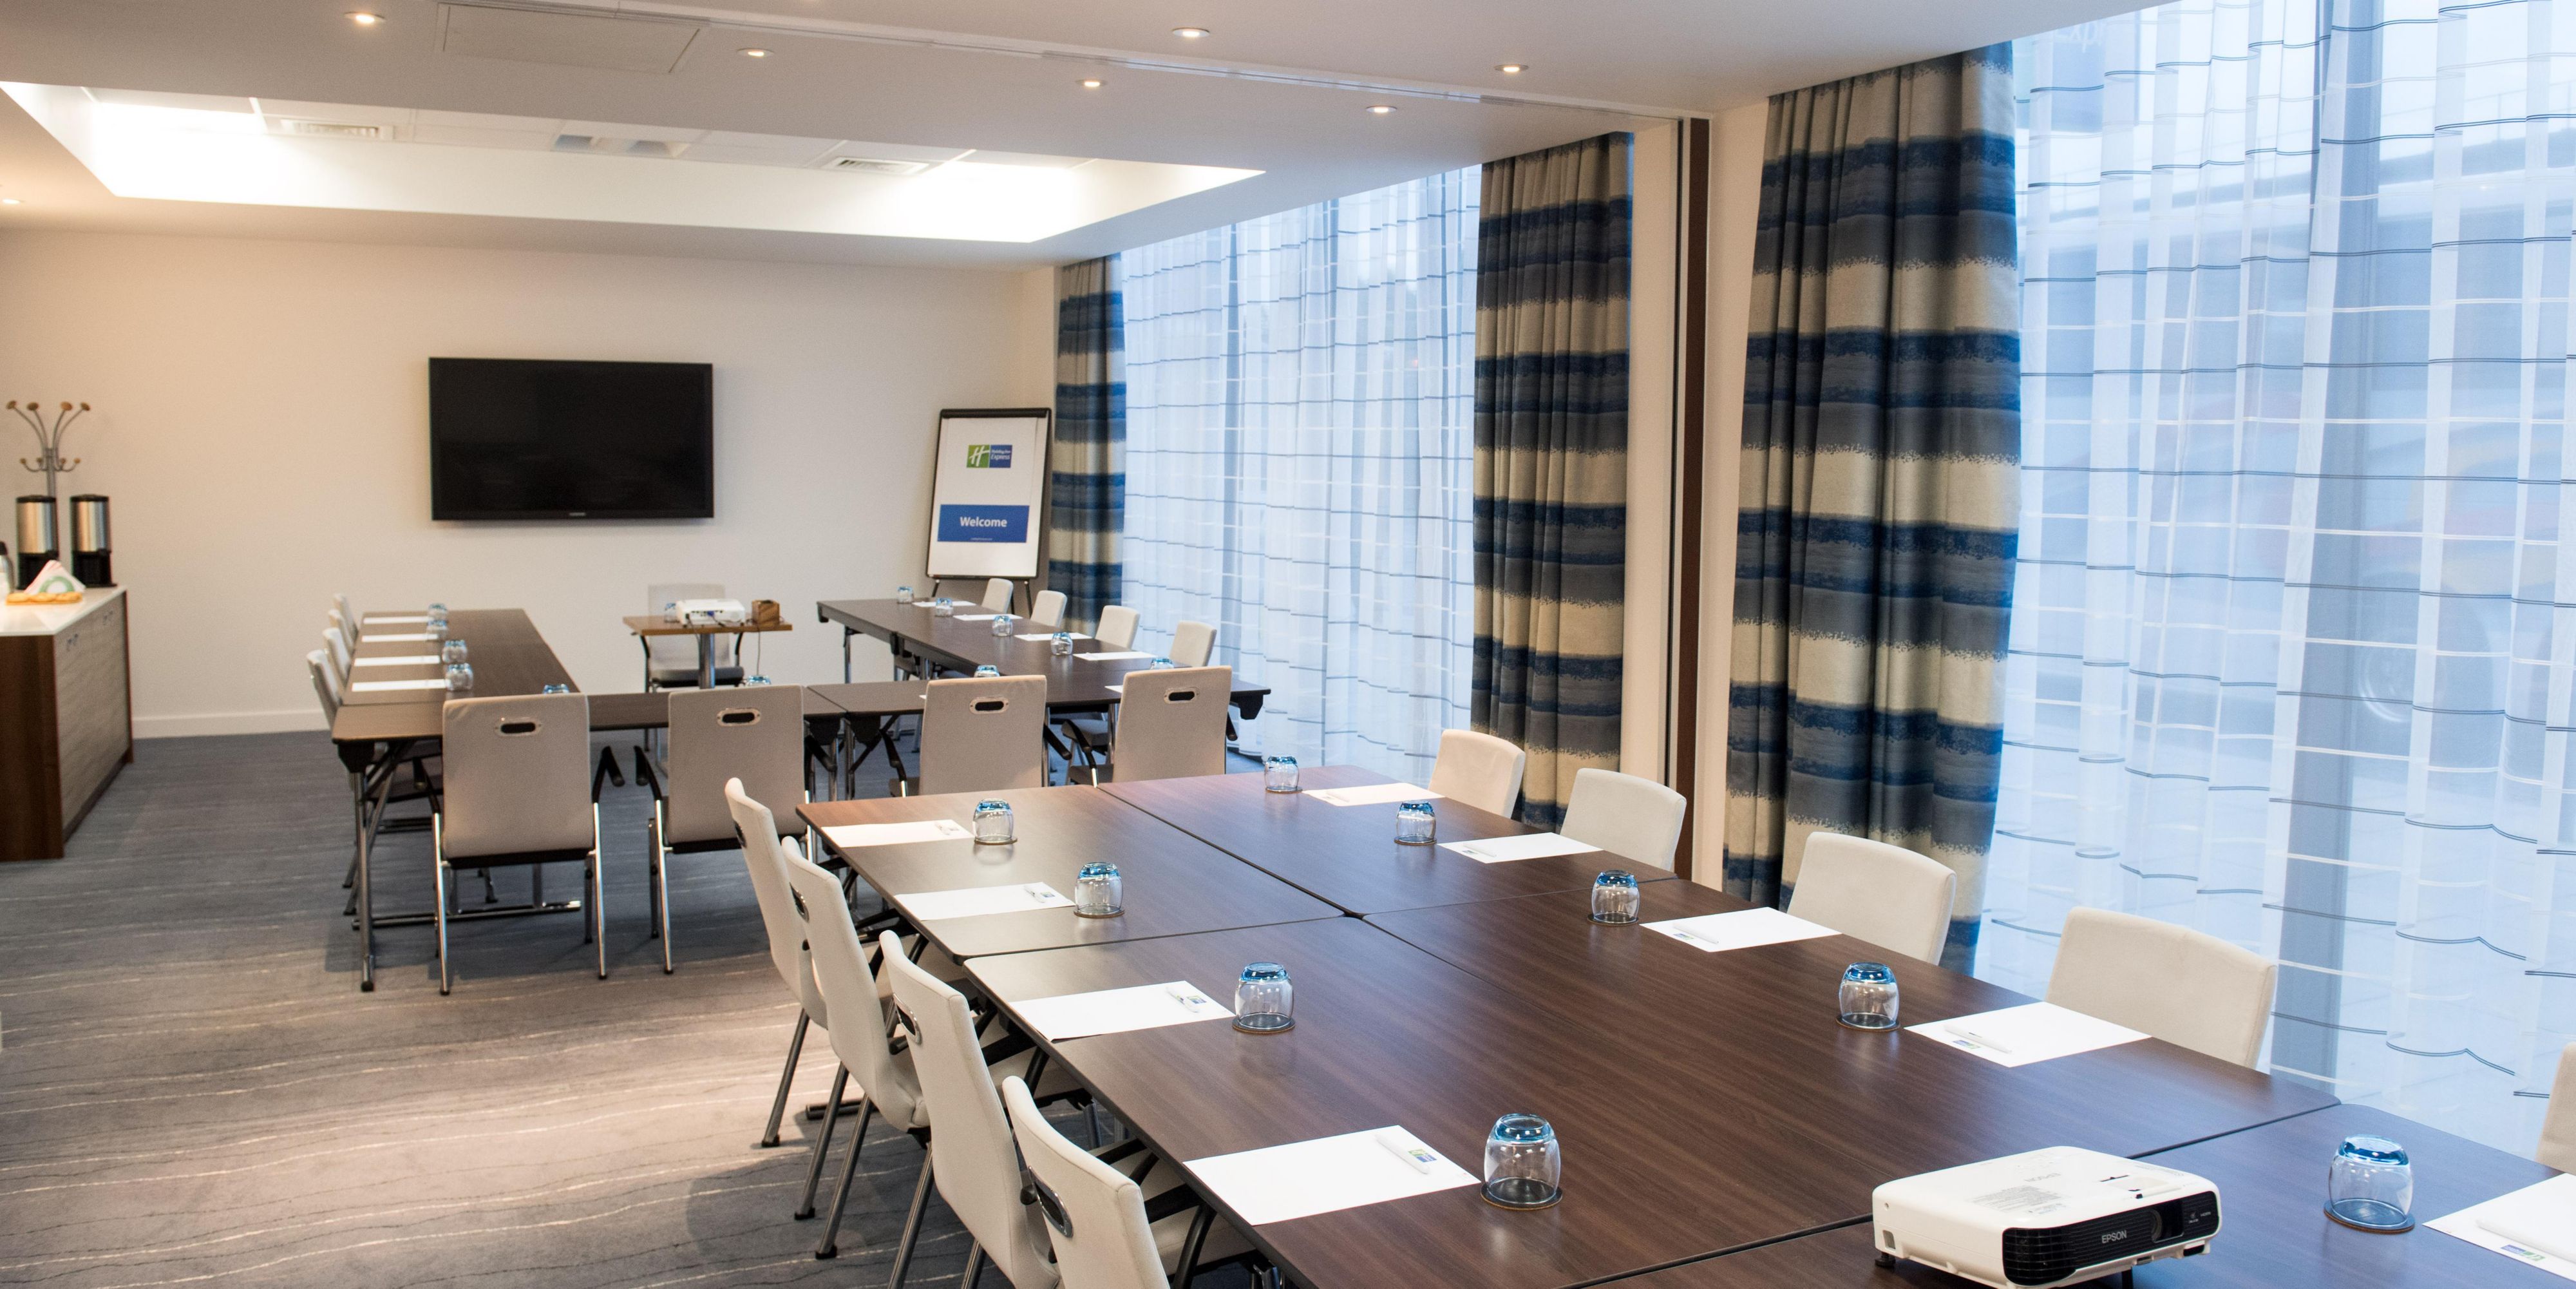 The Royal Albert Suite is a spacious meeting room with natural daylight and views out over London City Airport.  What better place to have a business meeting of up to 20 delegates.